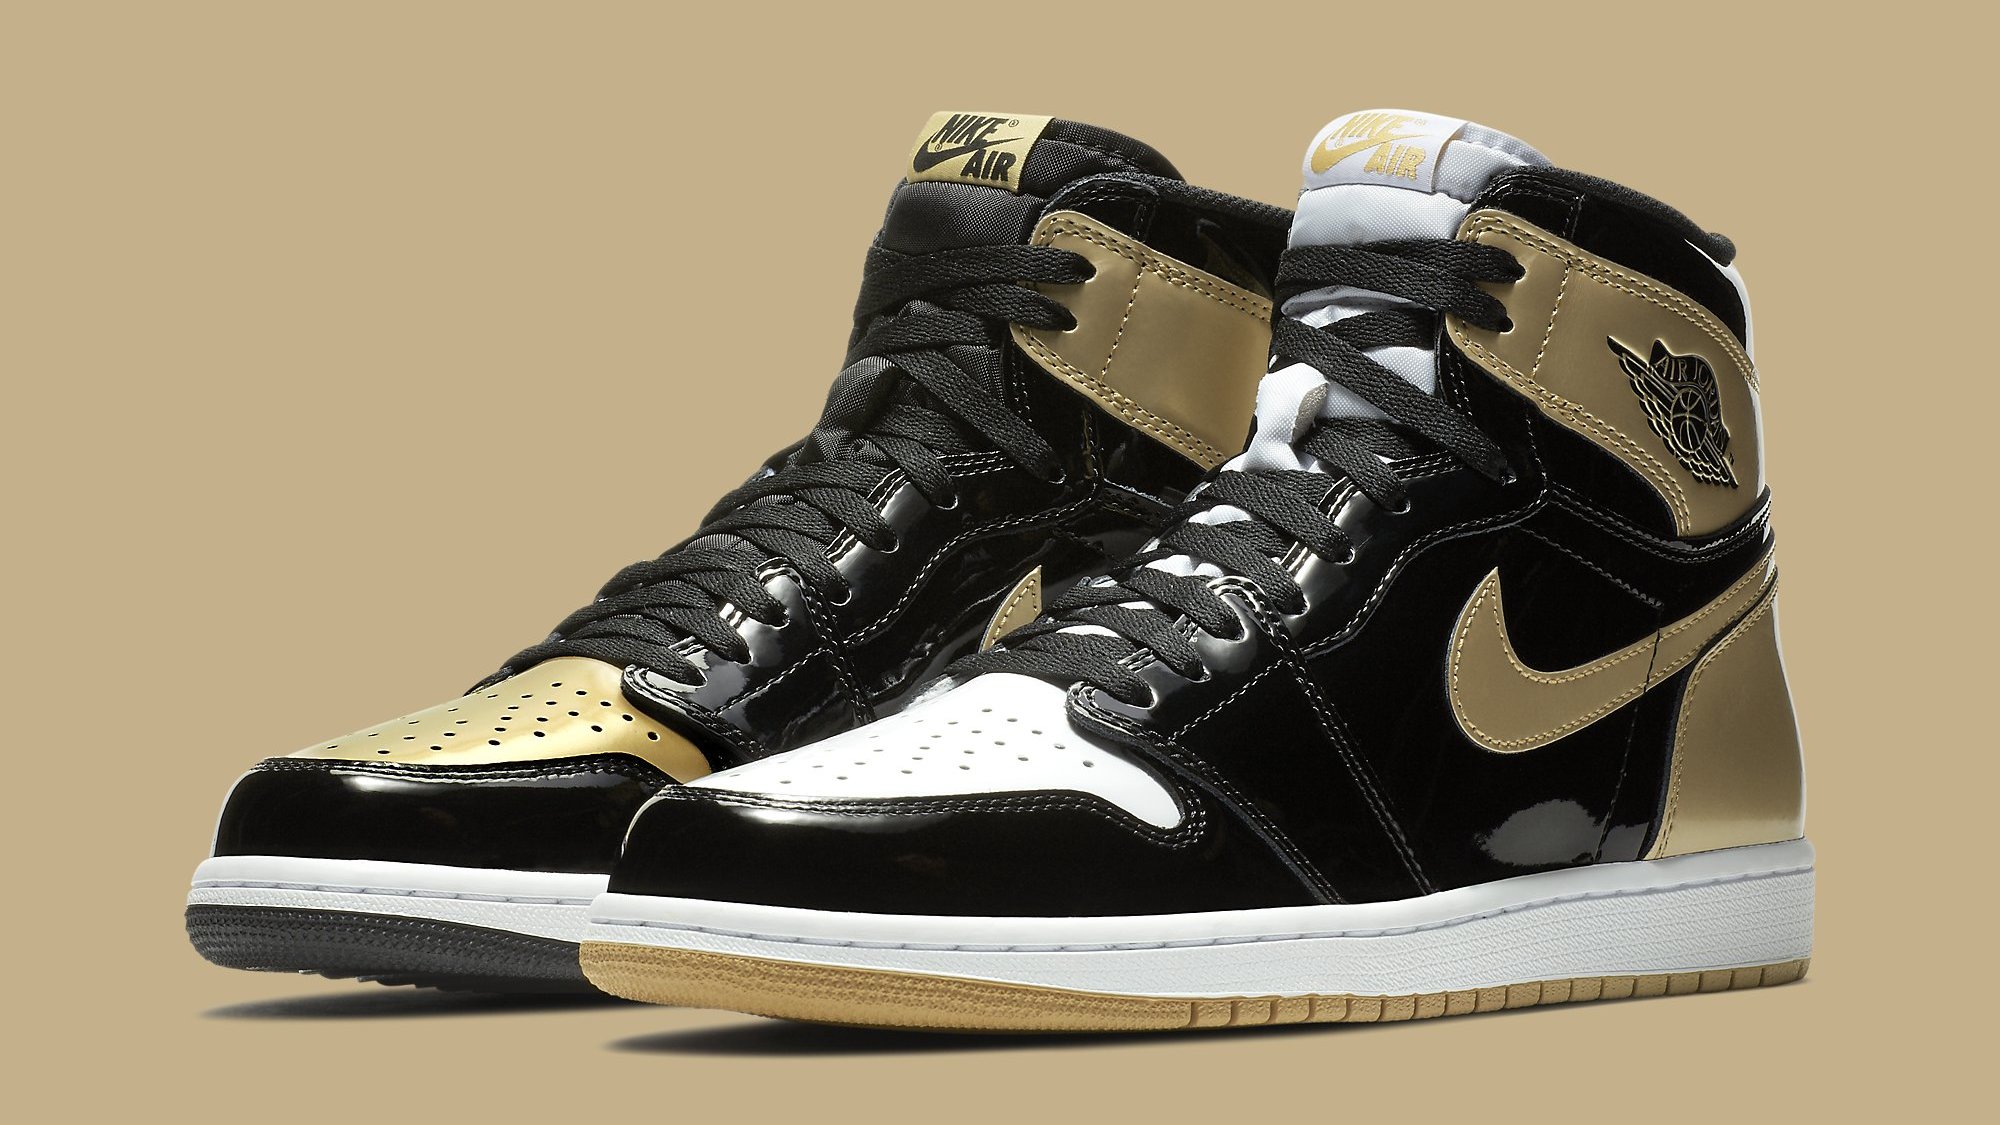 Where to Buy 'Top 3 Gold' Air Jordan 1s Releasing on Cyber Monday